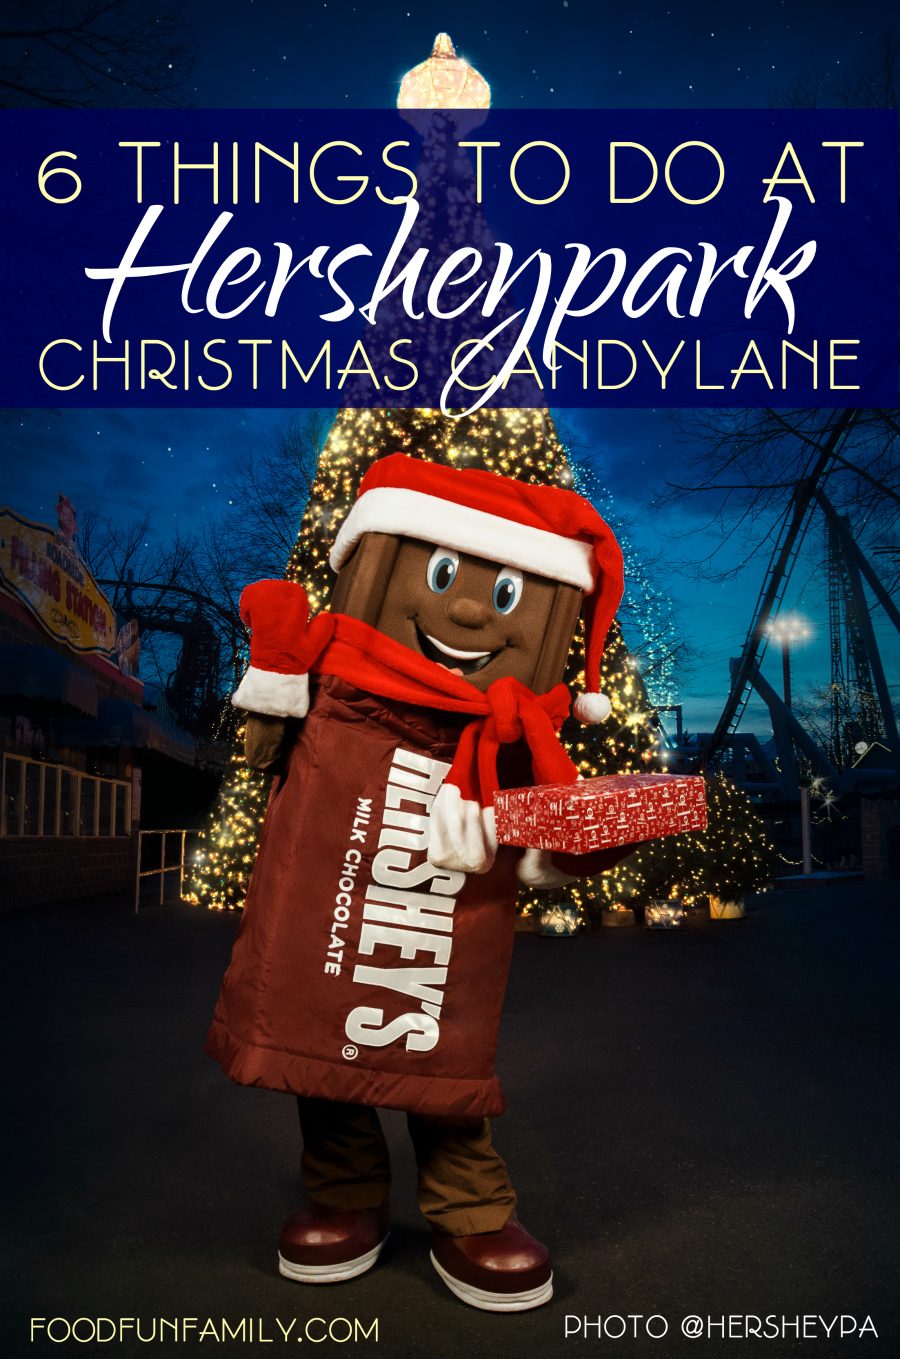 6 Things to Do at Hersheypark Christmas Candylane